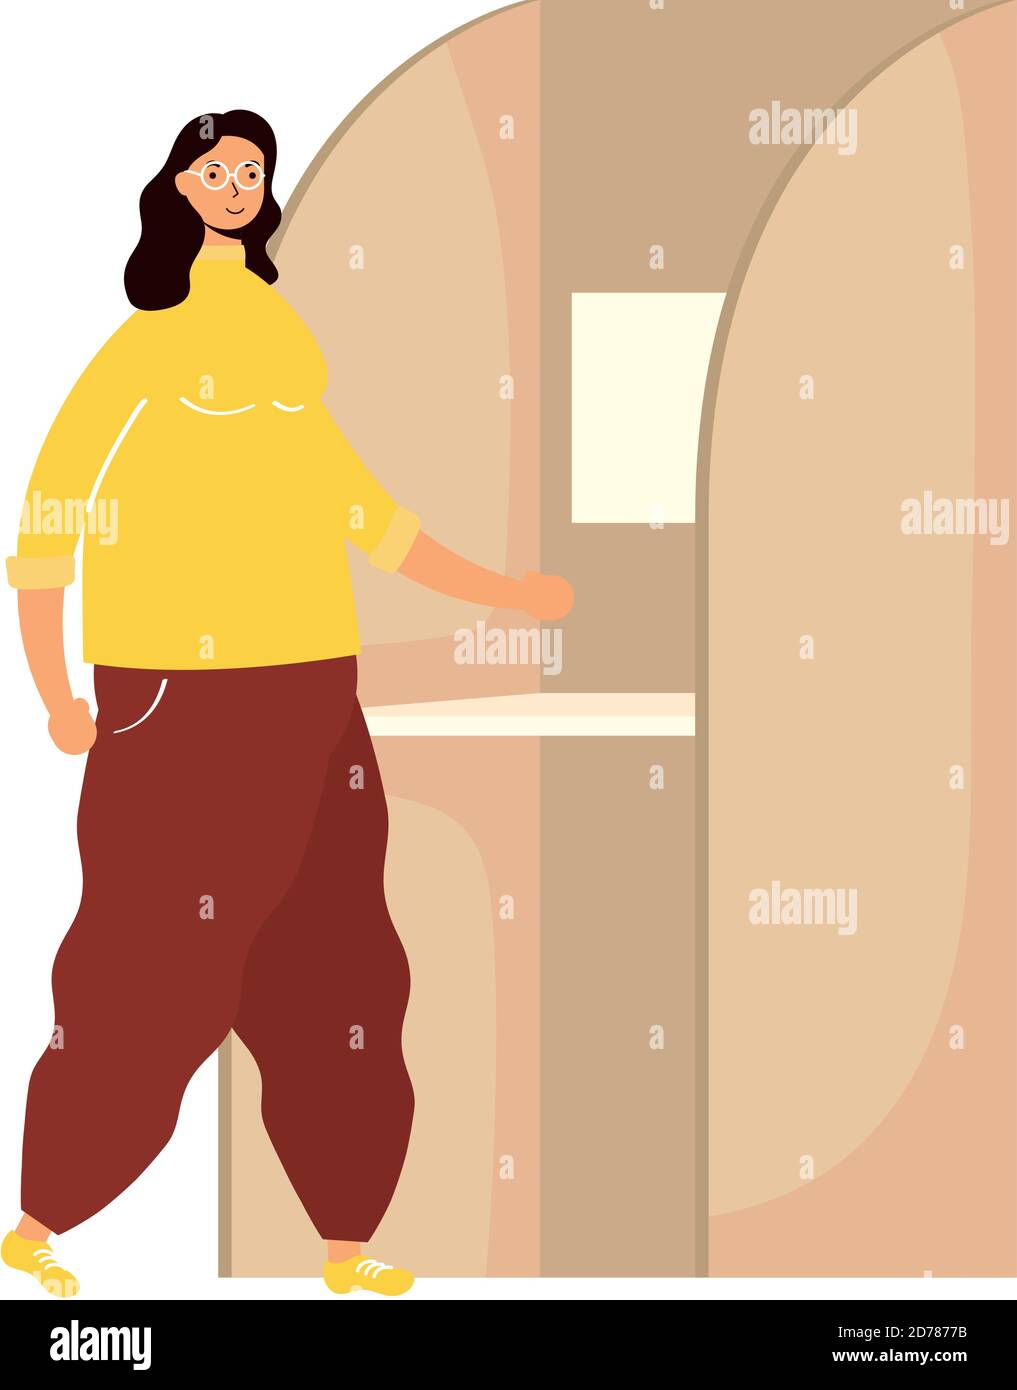 young woman in voting cubicle character vector illustration design Stock Vector